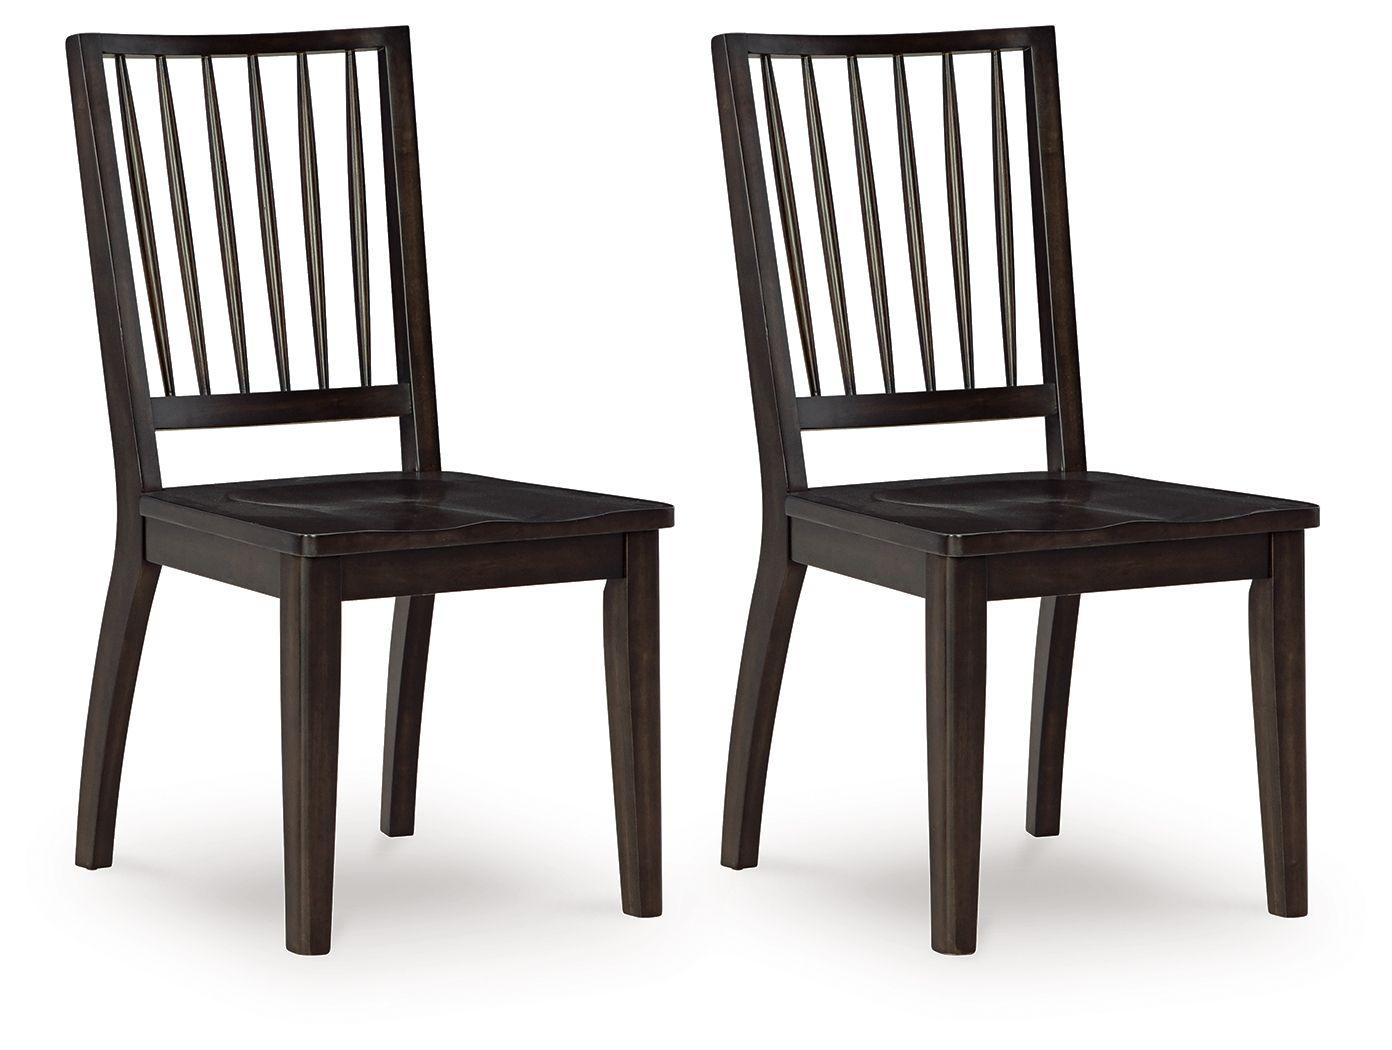 Signature Design by Ashley® - Charterton - Brown - Dining Room Side Chair (Set of 2) - 5th Avenue Furniture